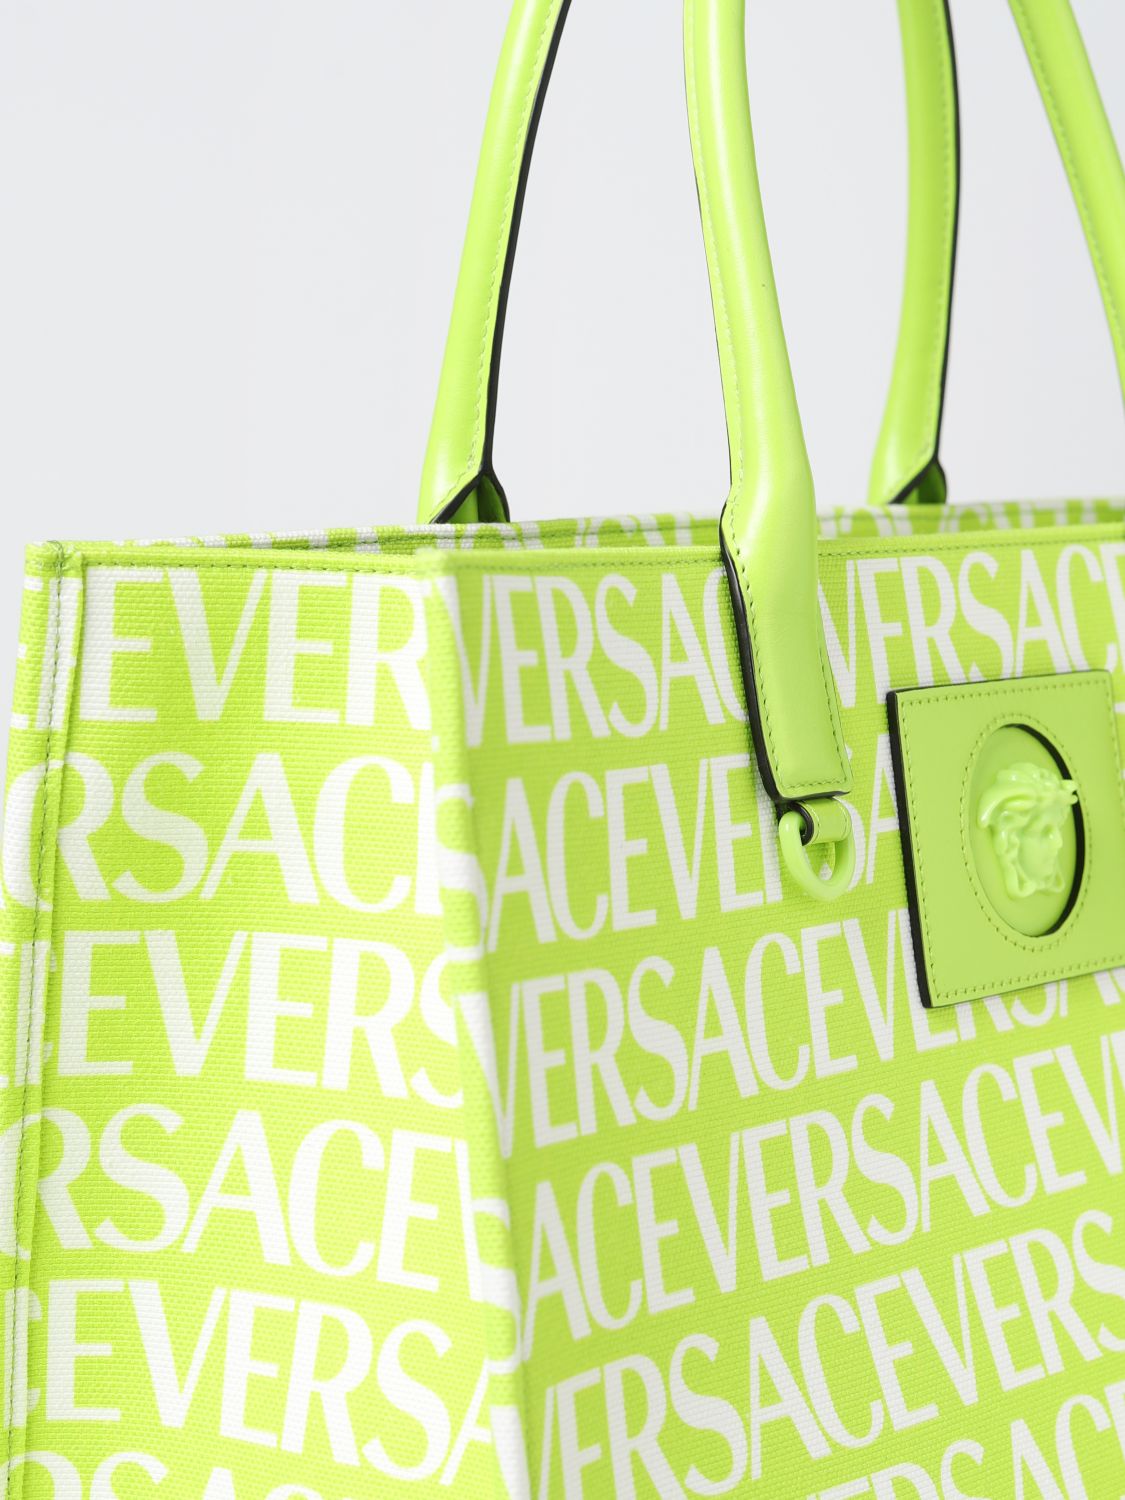 VERSACE: bag in canvas with all over logo - Pink  Versace tote bags  10047411A06544 online at